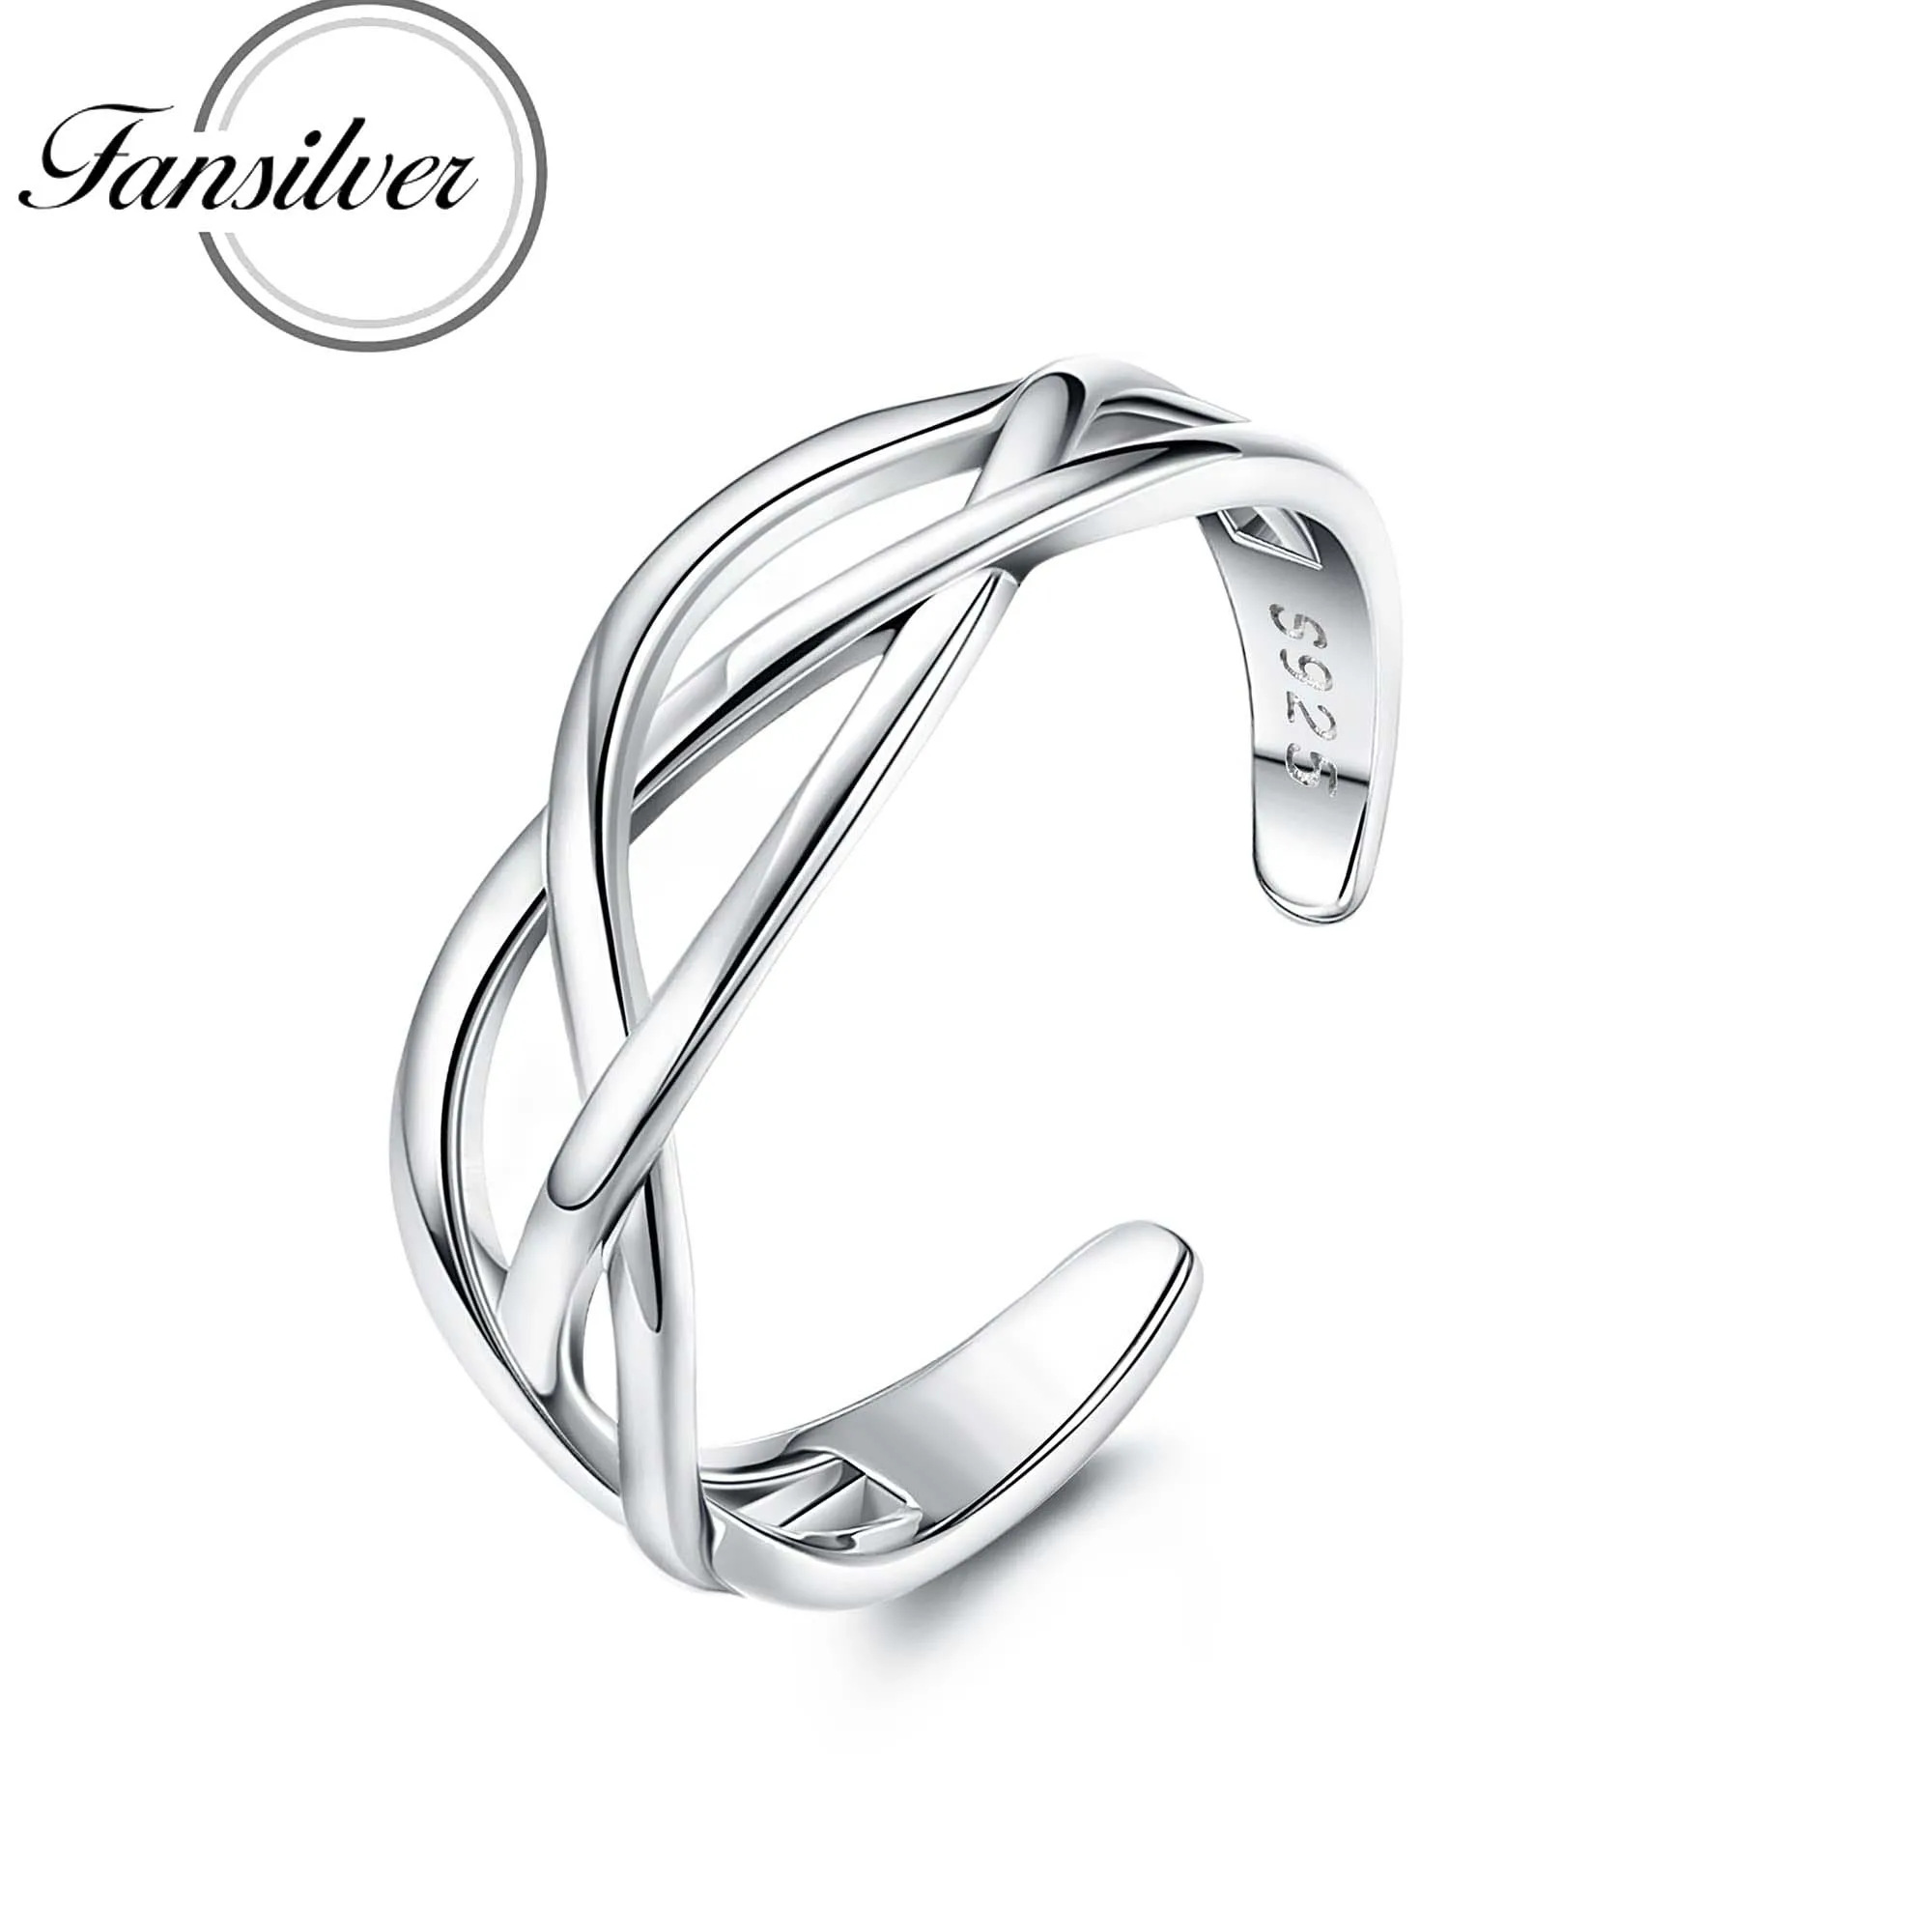 

Fansilver 925 Sterling Silver Toe Rings for Women Adjustable Wrap Open Cuff Toe Ring Hypoallergenic Vintage Band Rings Wholesale